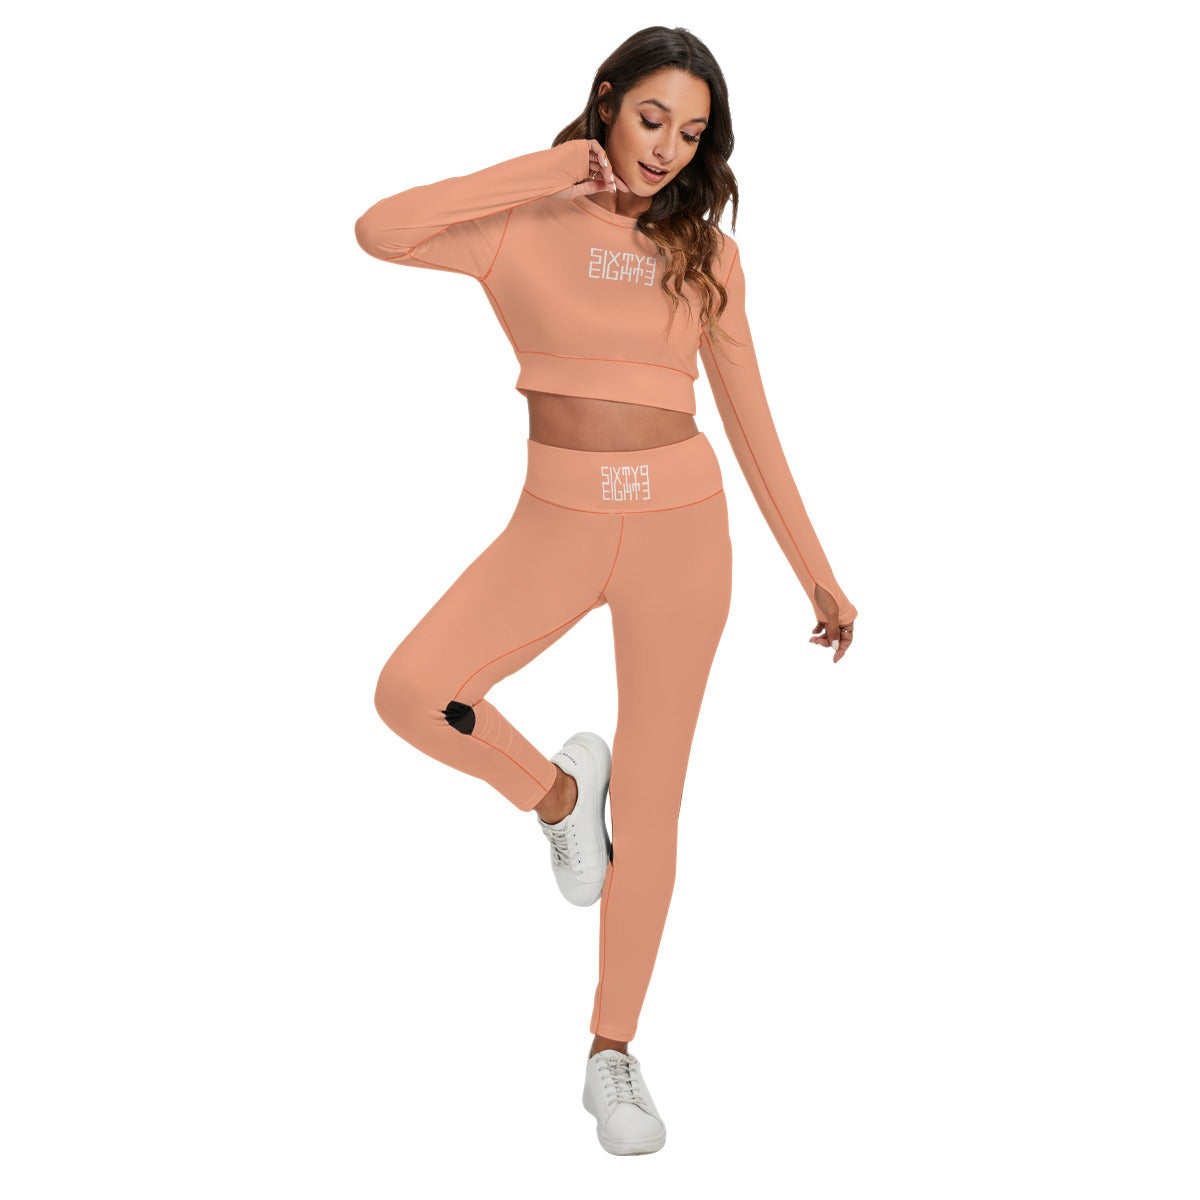 Sixty Eight 93 Logo White Peach Women's Sport Set With Backless Top And Leggings